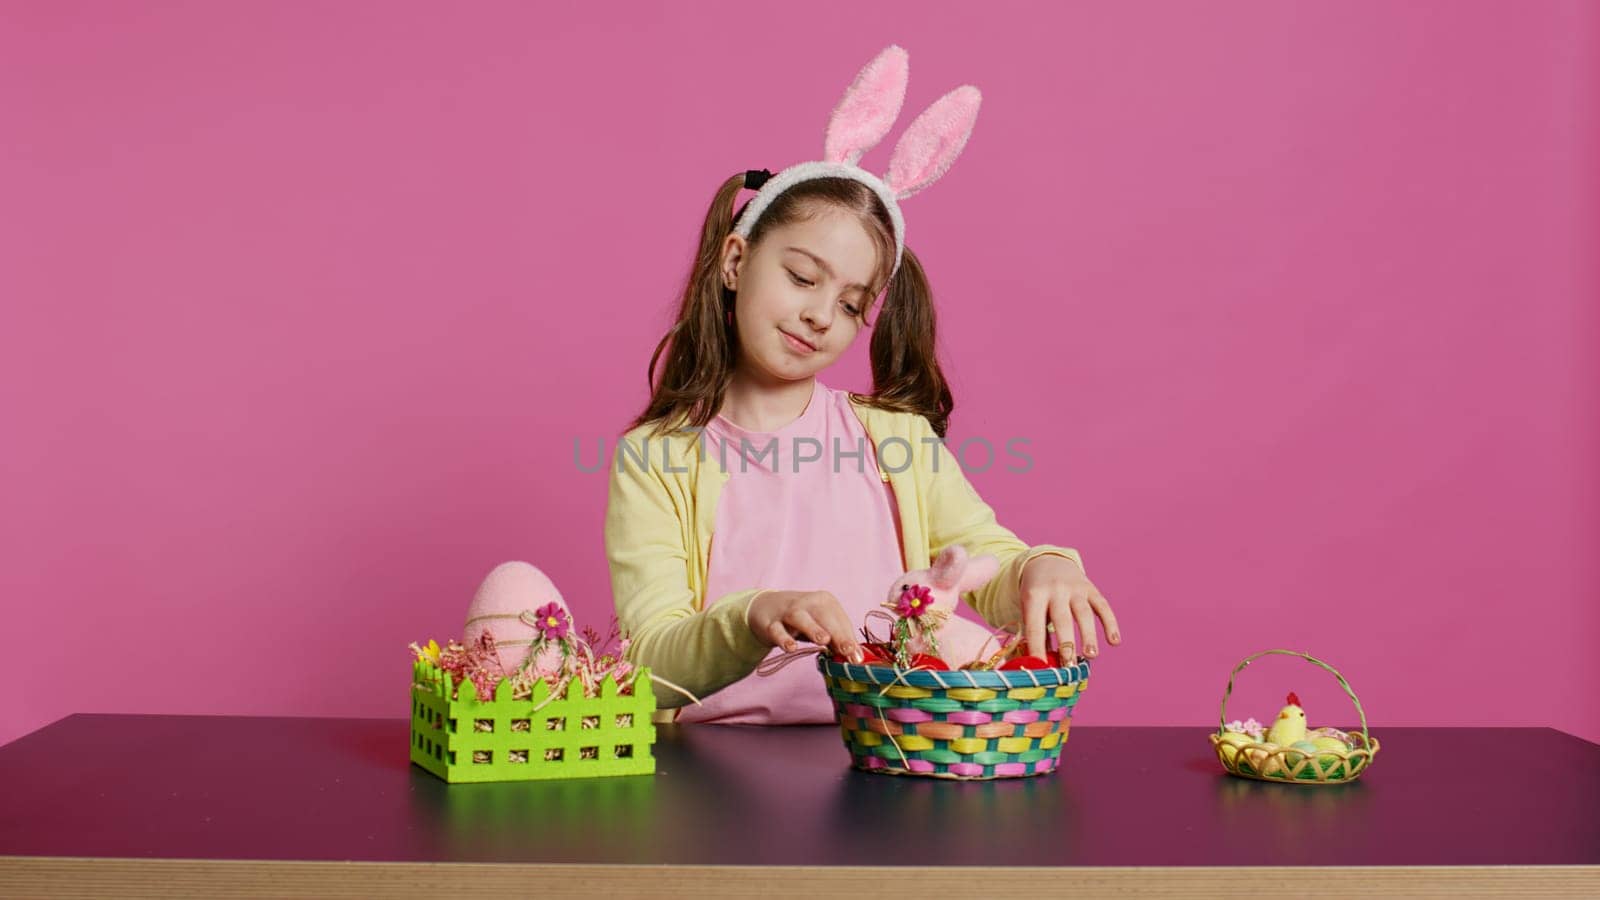 Excited young girl arranging painted eggs in a basket to prepare for easter holiday celebration, creating festive arrangements. Playful happy toddler with bunny ears, creative activity. Camera B.